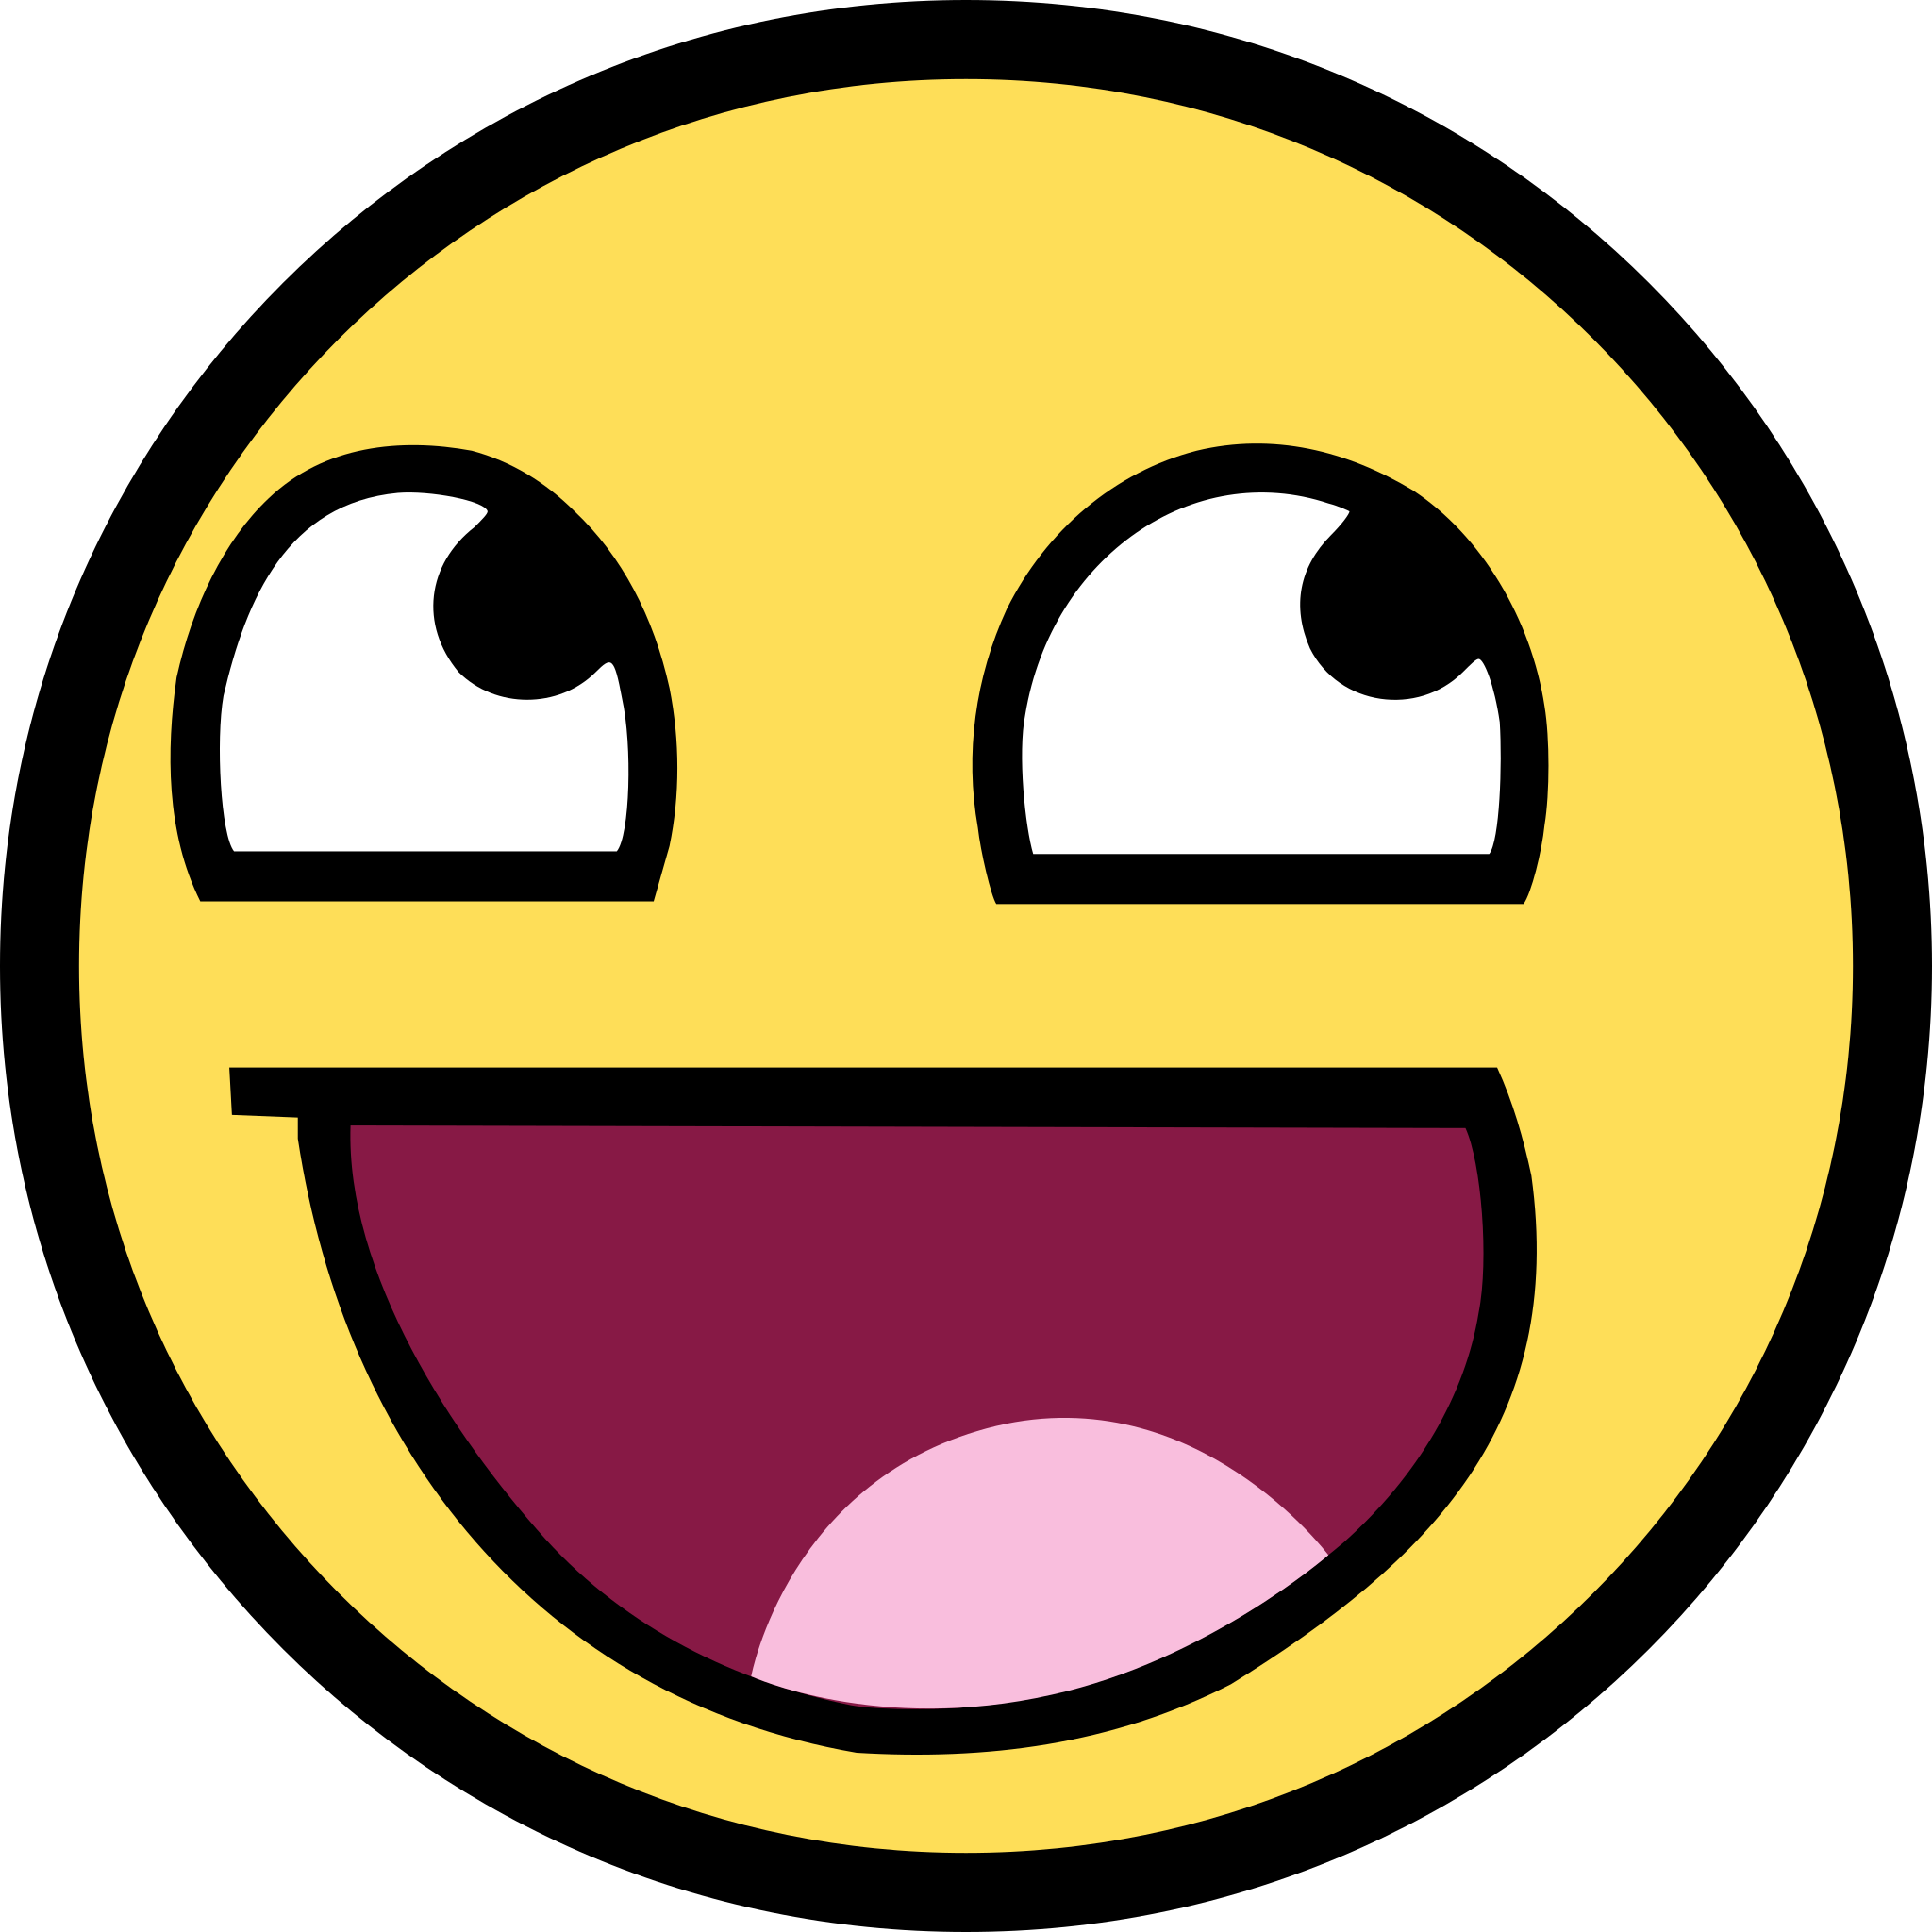 2048px-718smiley.svg.png